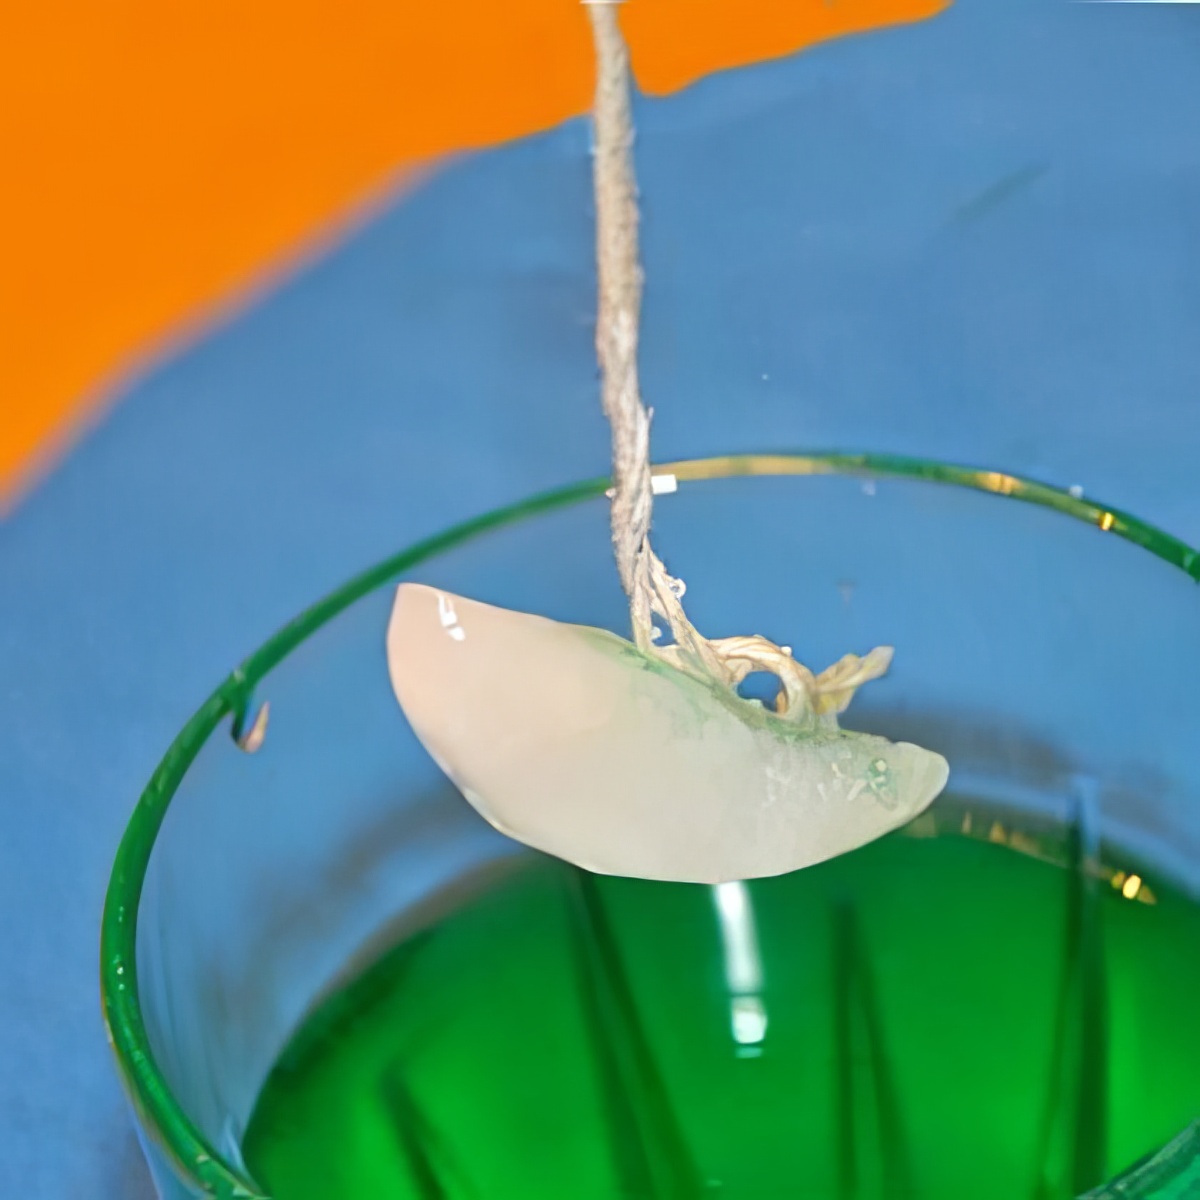 Learn and have fun on this easy lift an ice cube with a string magic trick!